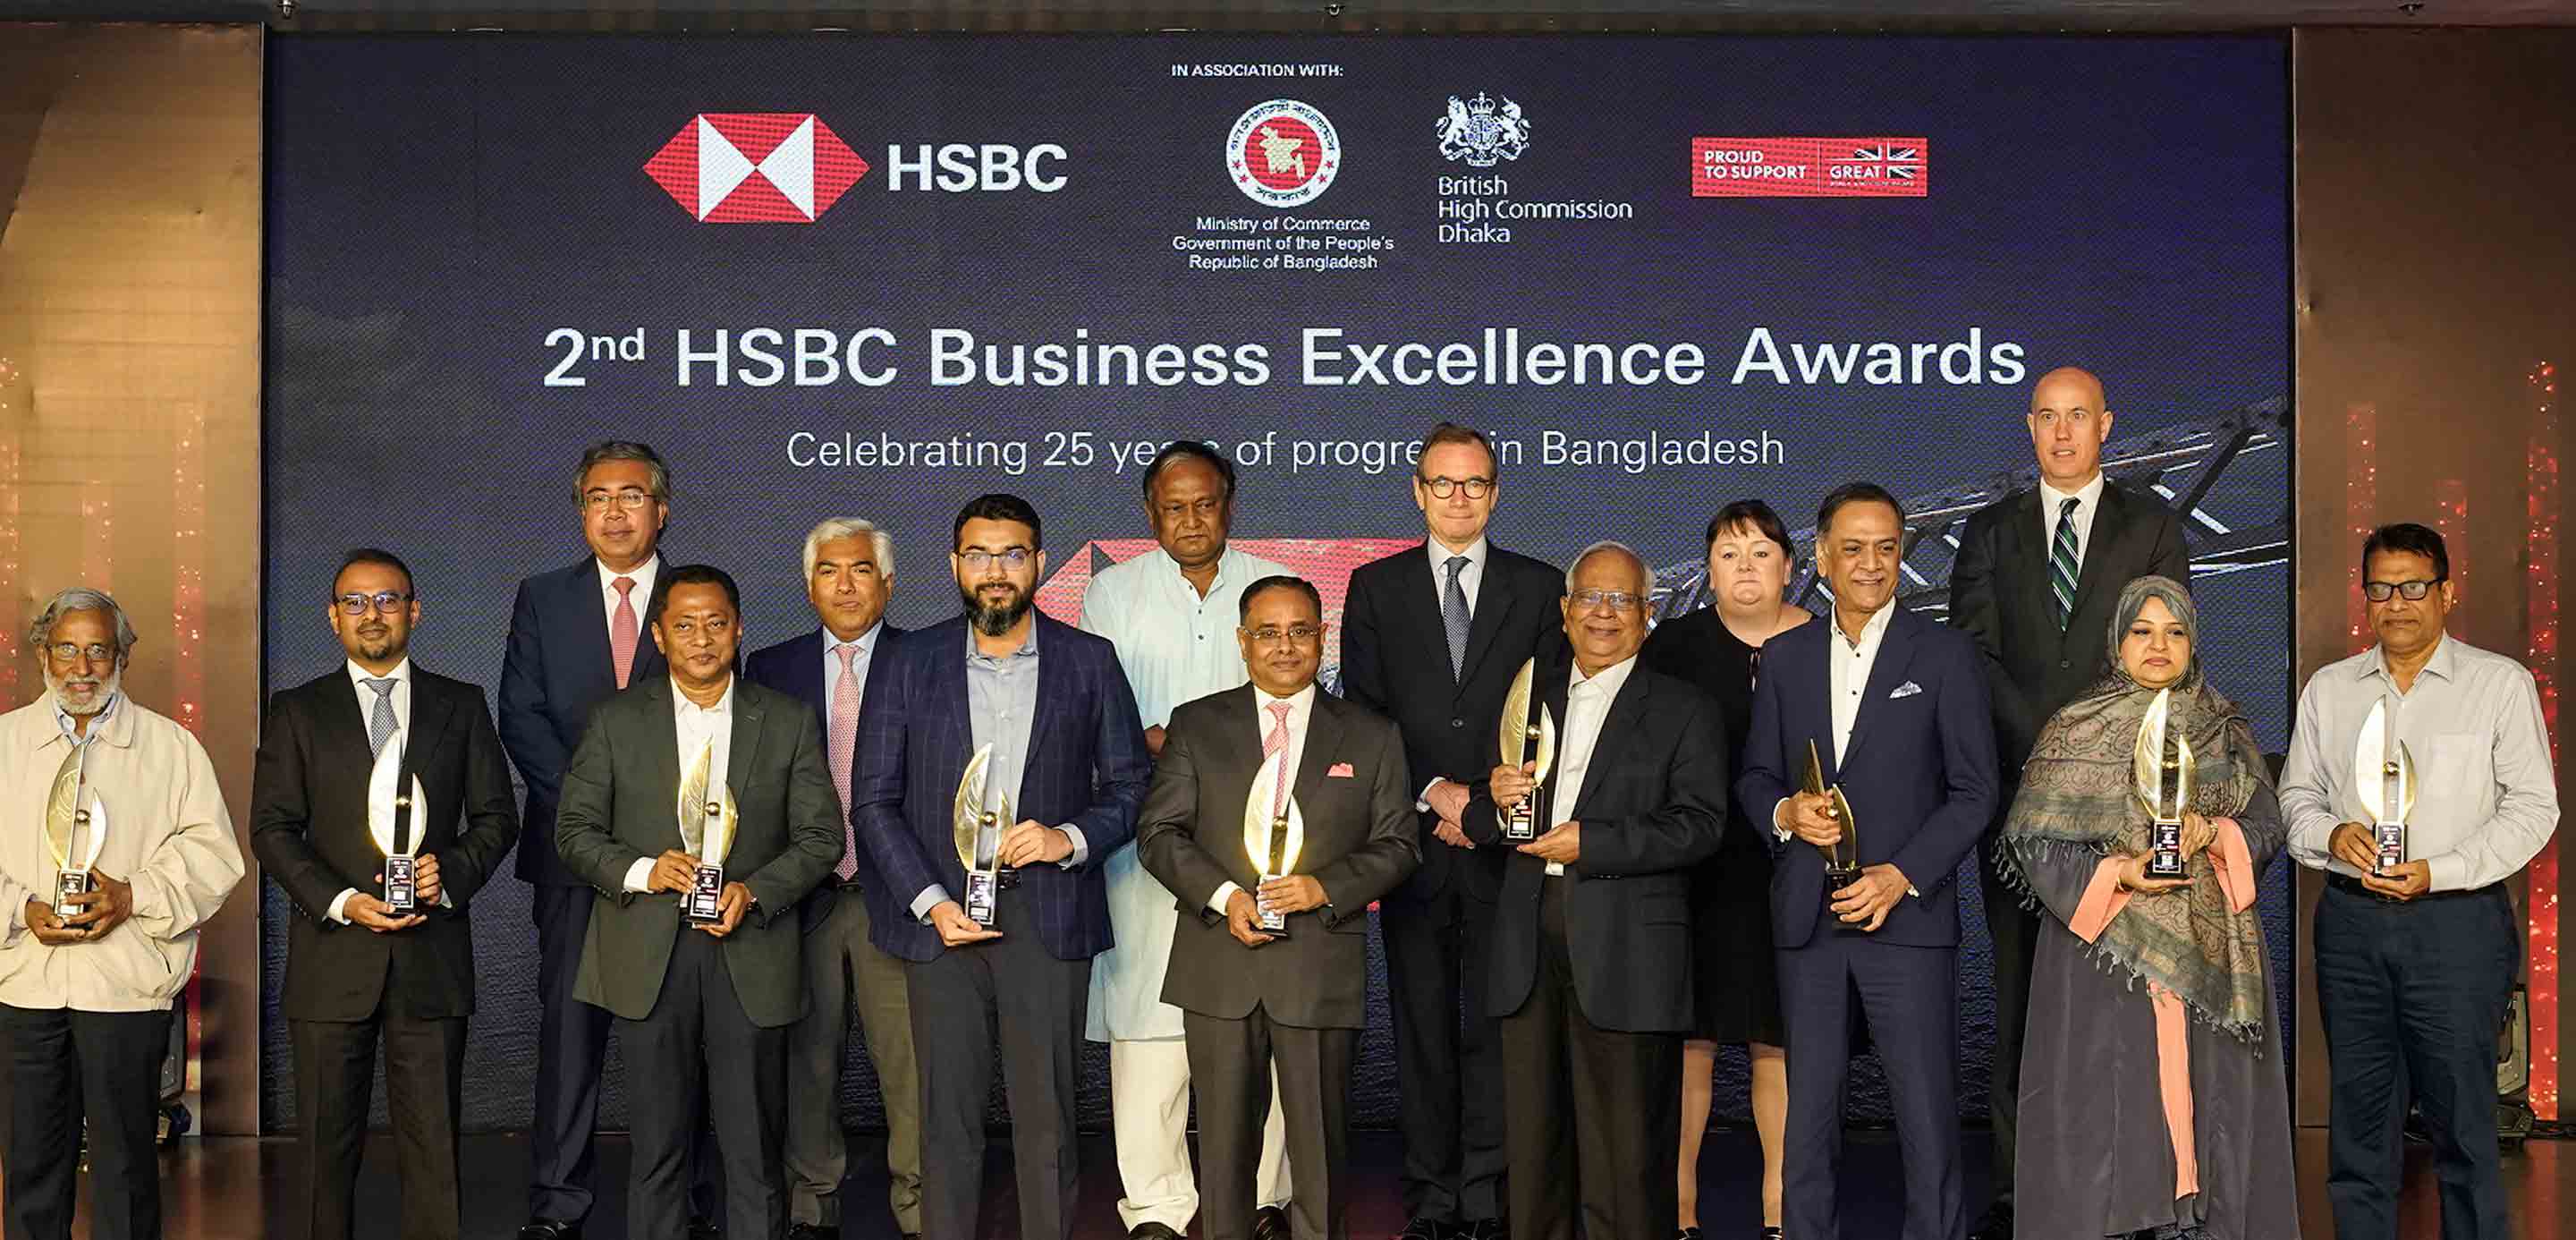 2nd HSBC Business Excellence Awards trophy